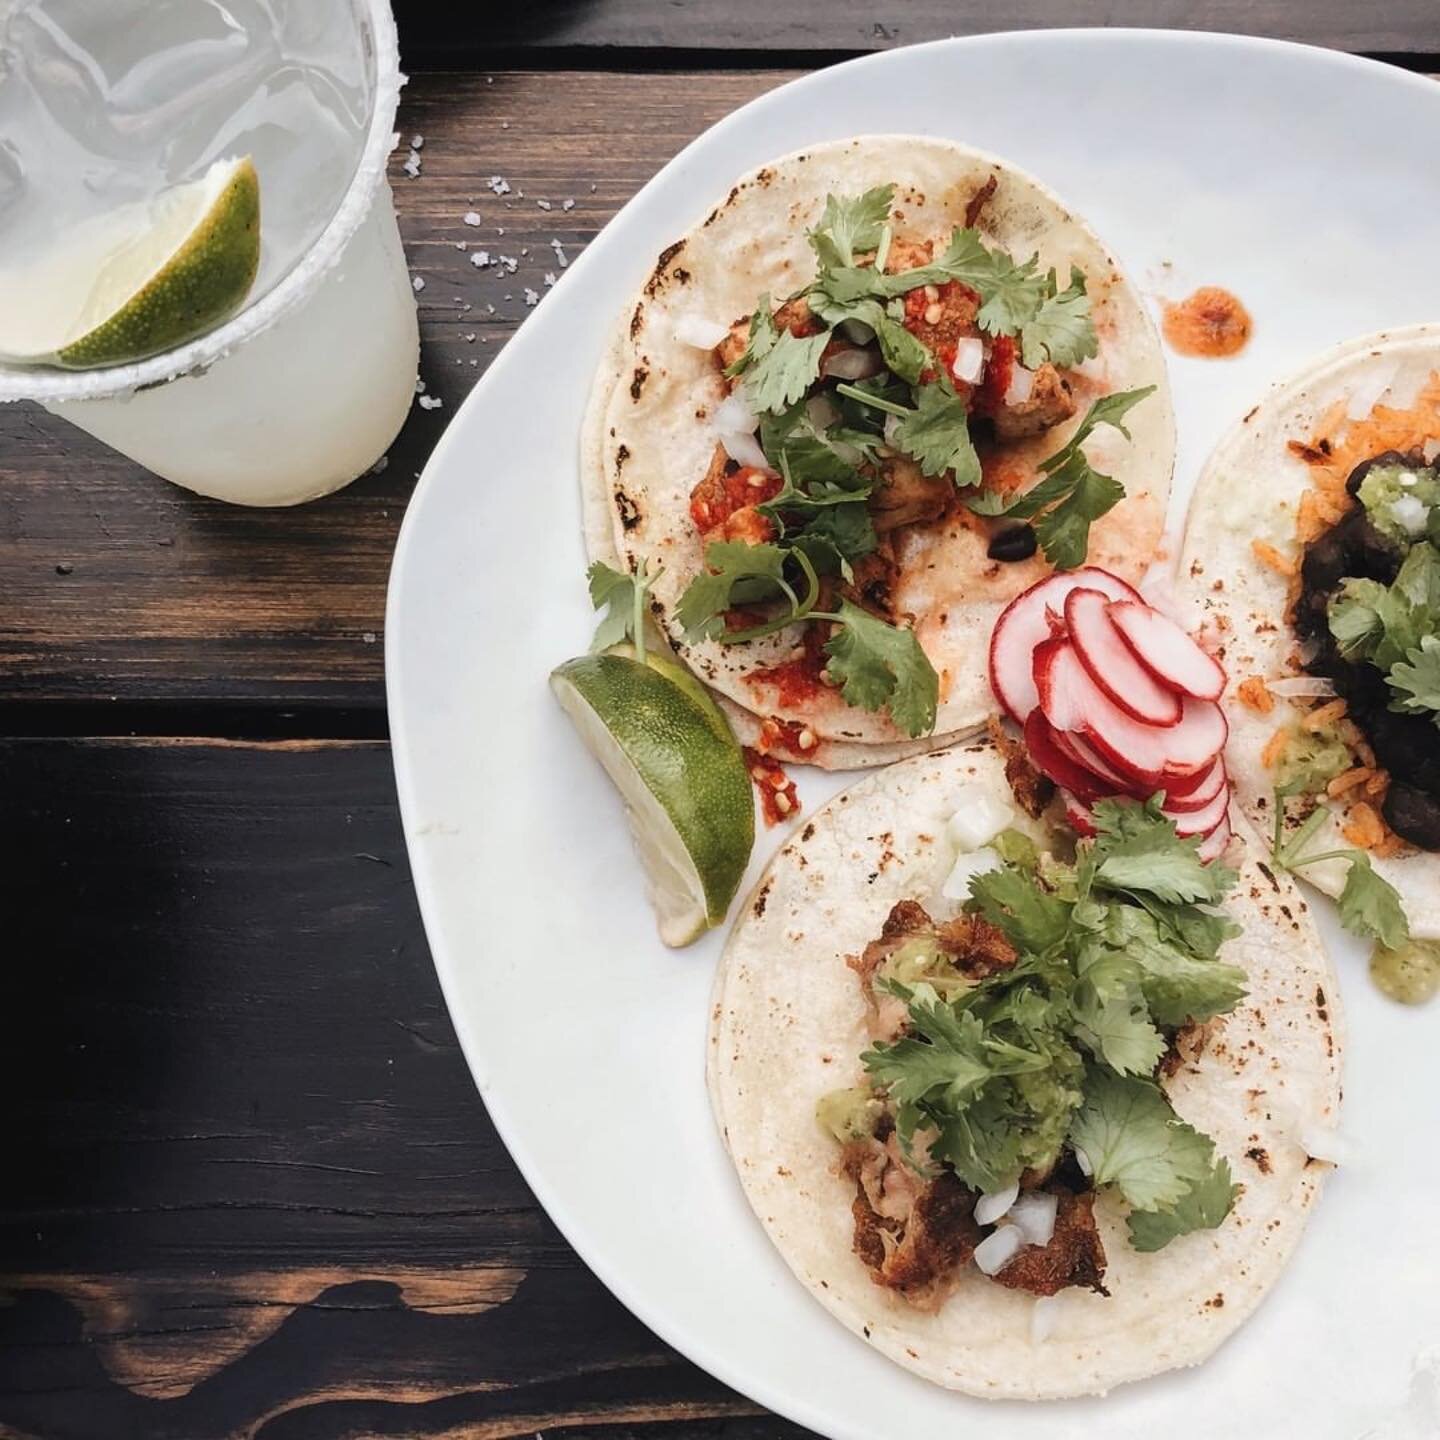 The spread isn't complete without a margarita! 🍹 #TallulahsTaqueria⁣

#takeittogo #providencefood 
#foodie #margarita #rifoodie #mynewengland #rhodeisland #providence #cocktails #foodiegram #cheers #tastyfood #feedfeed #eeeeeats #infatuation #hungry